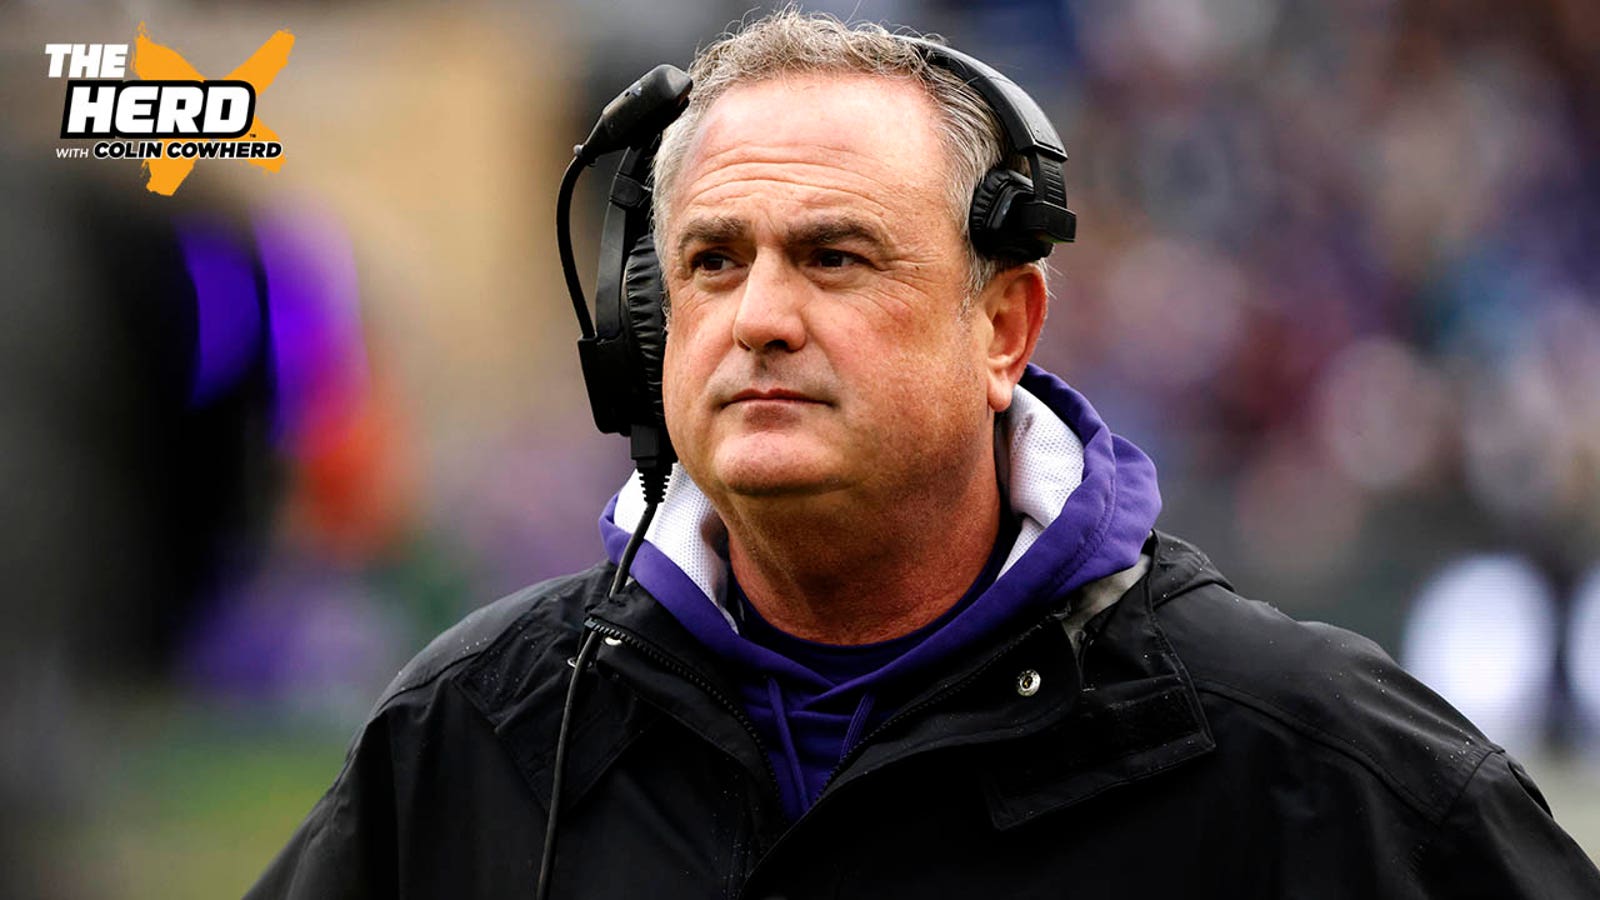 TCU head coach Sonny Dykes on preparing for Harbaugh and Michigan